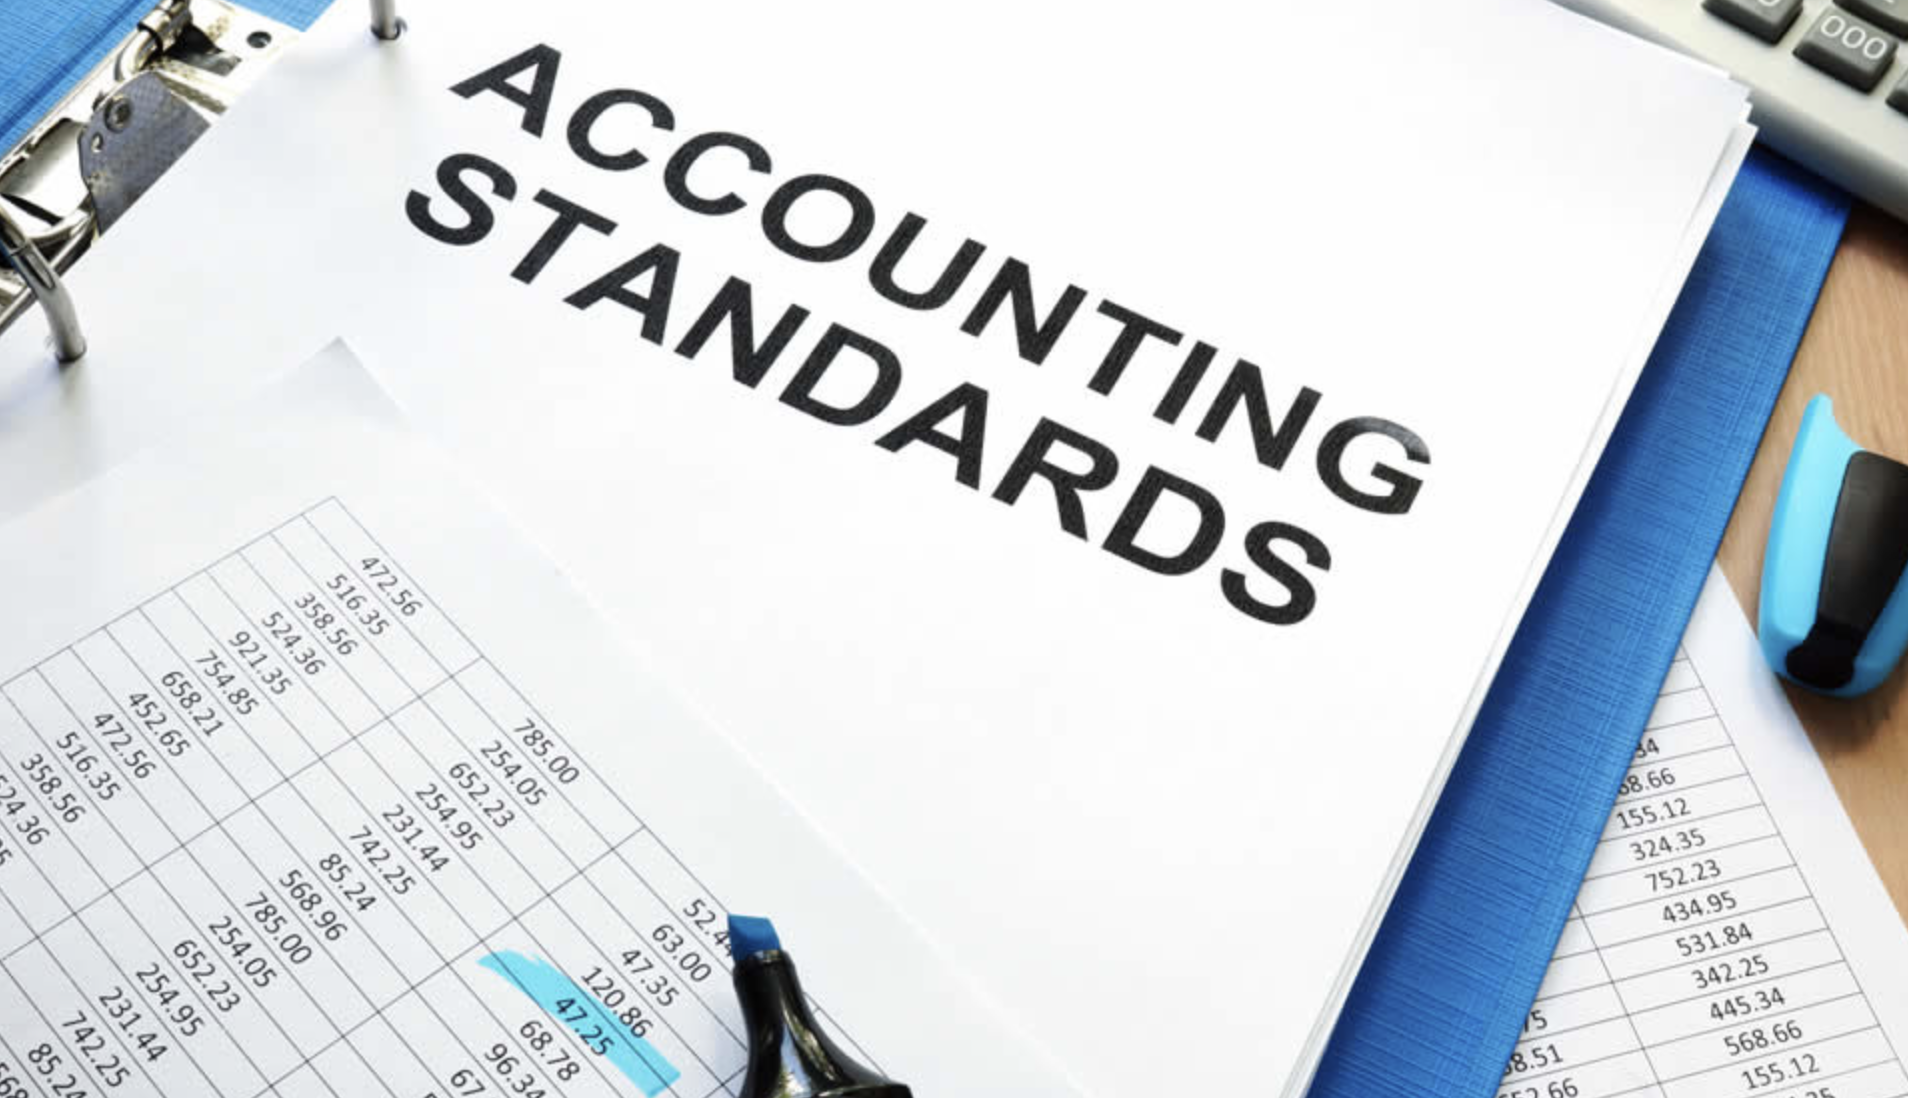 Accounting Standards print out